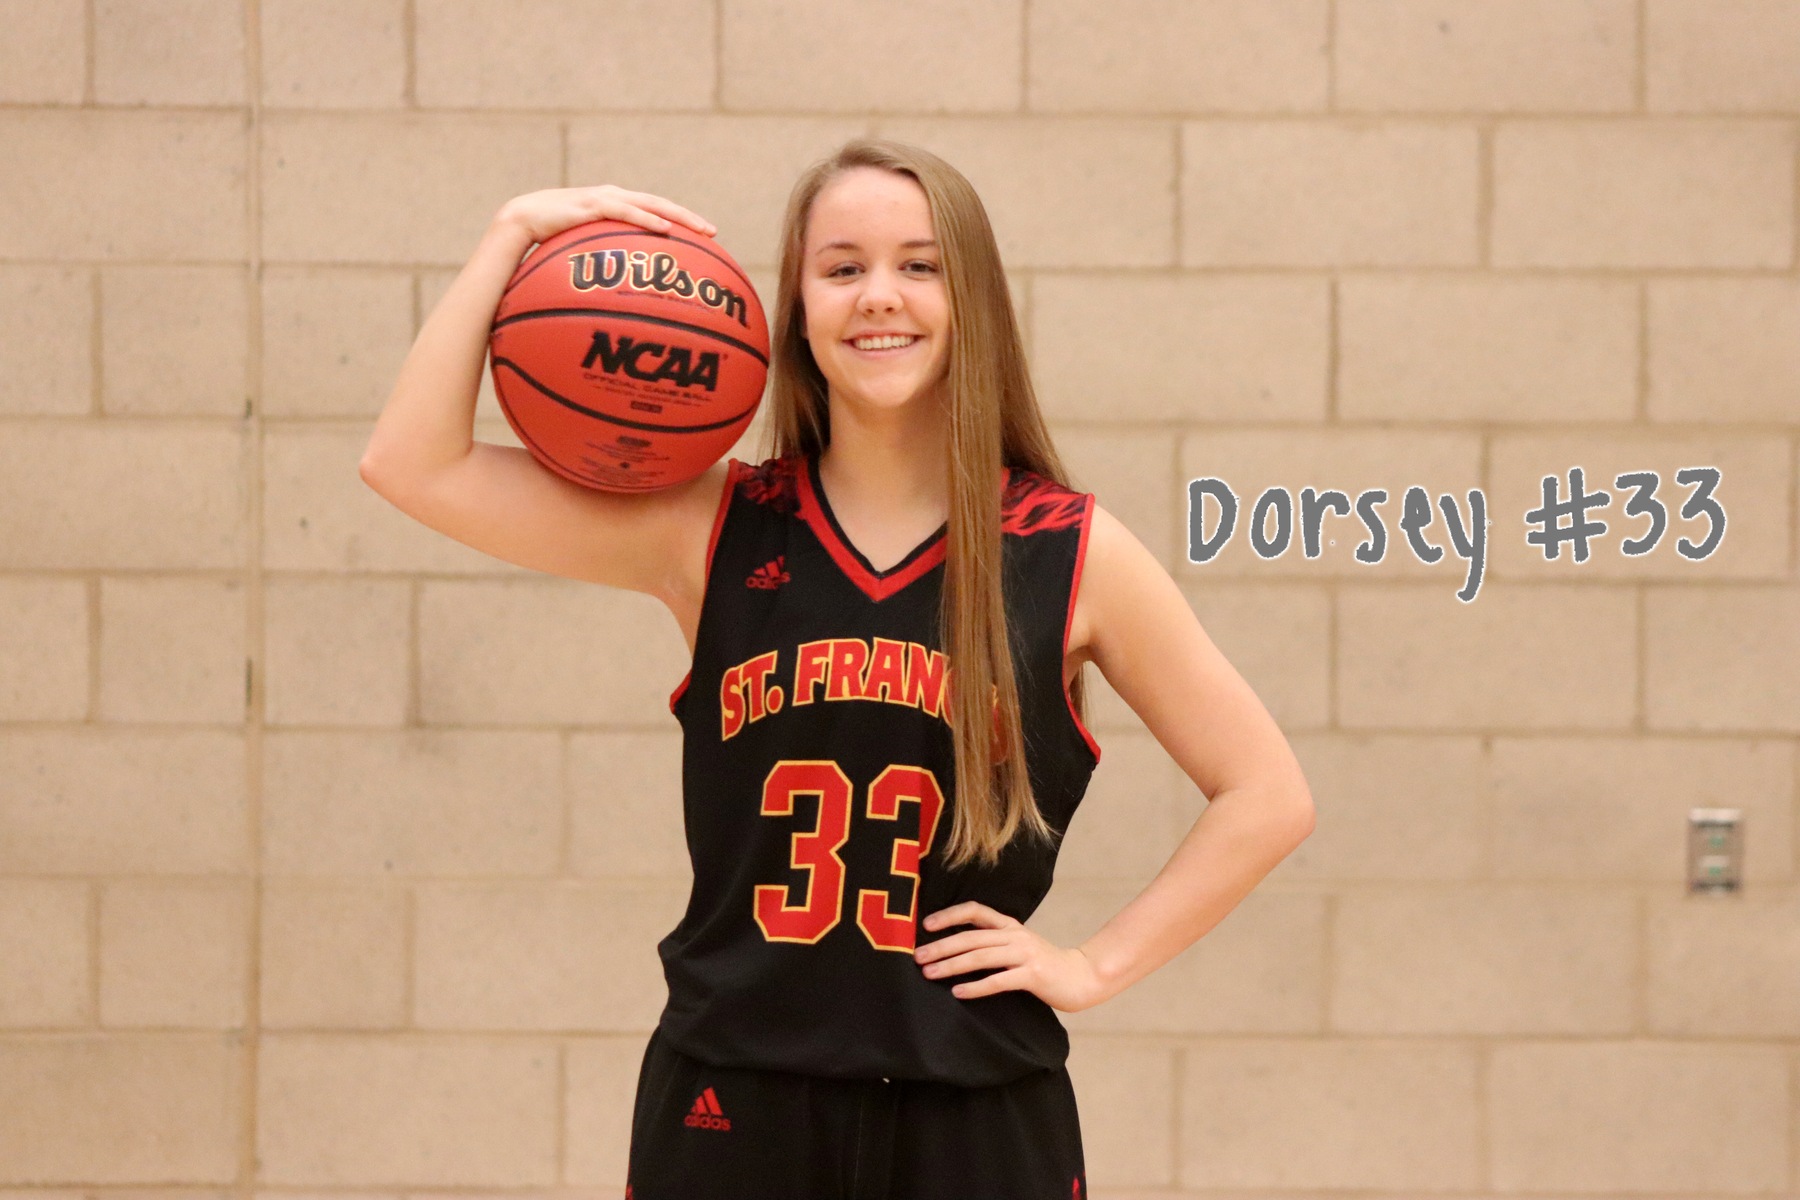 Get to Know: Basketball's #33 Hannah Dorsey